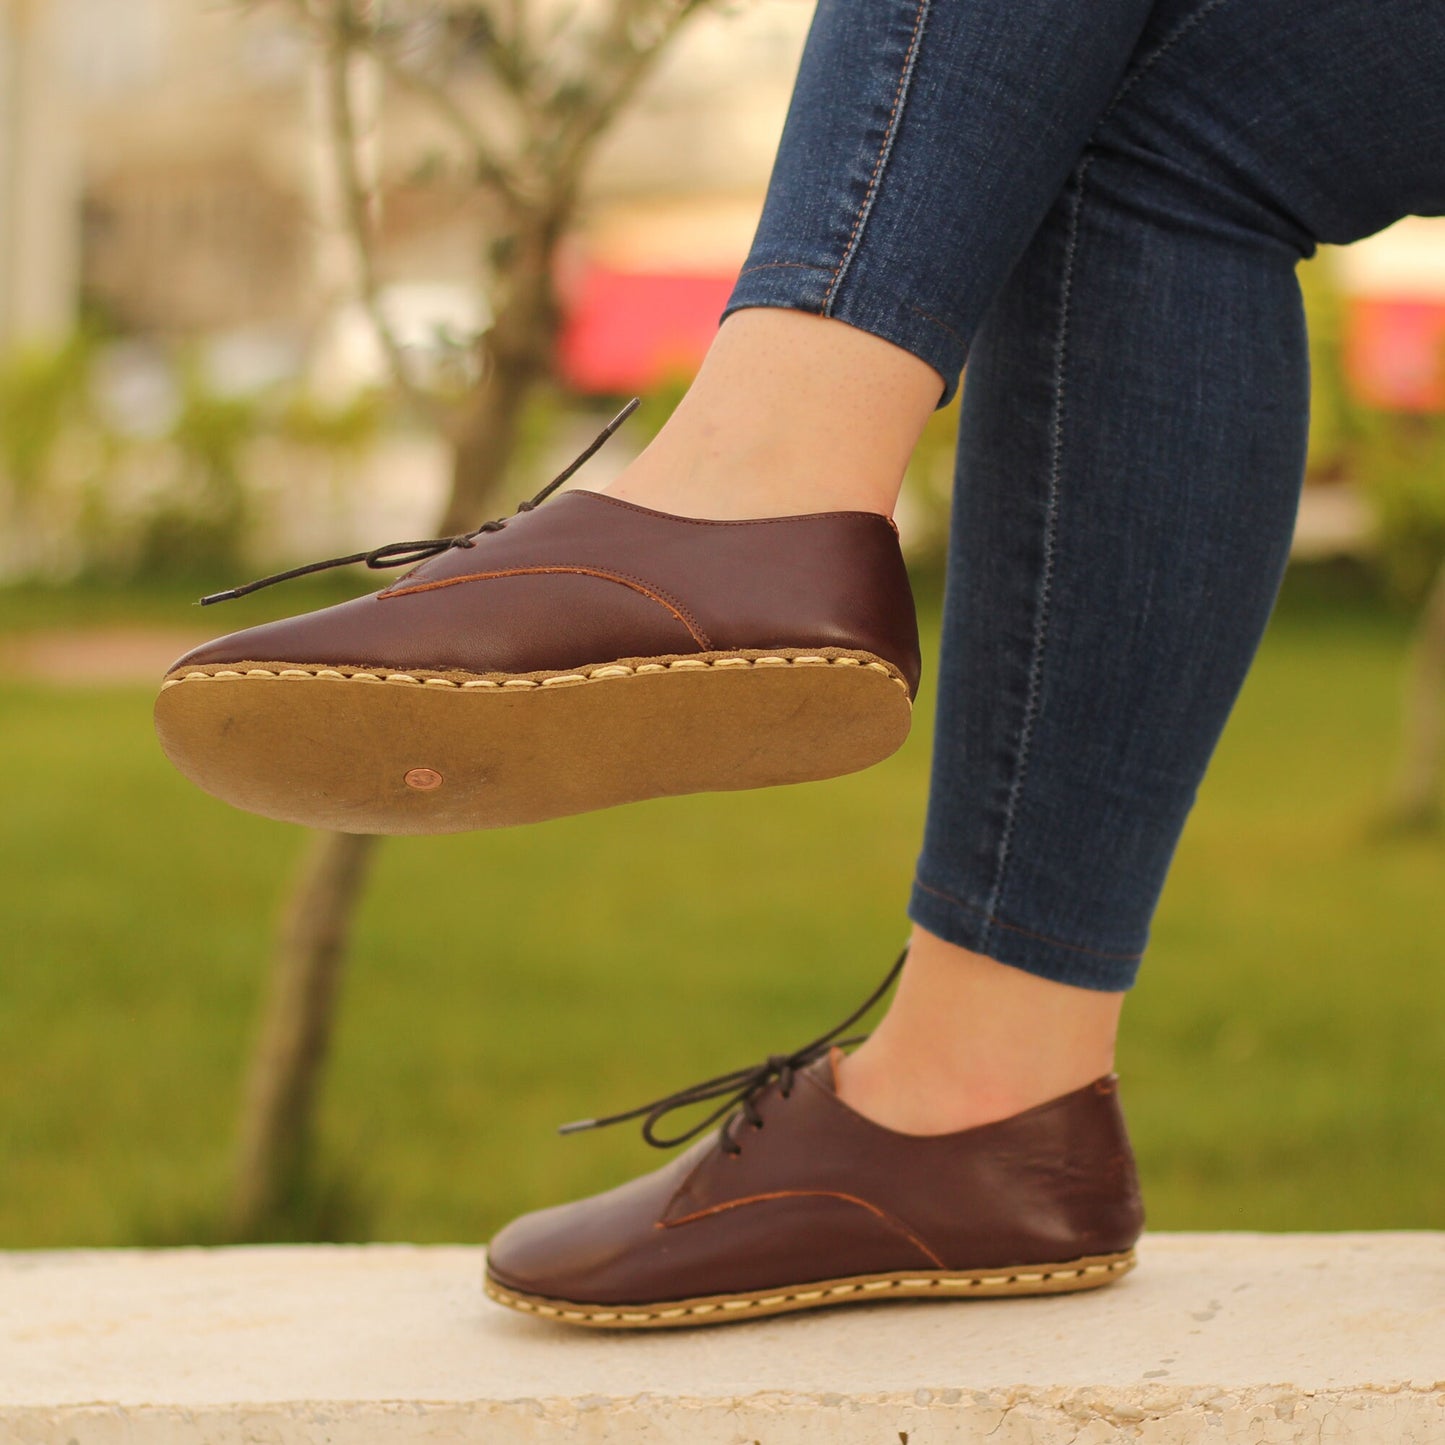 Handmade Wide Dark Brown Leather Barefoot Shoes for Women